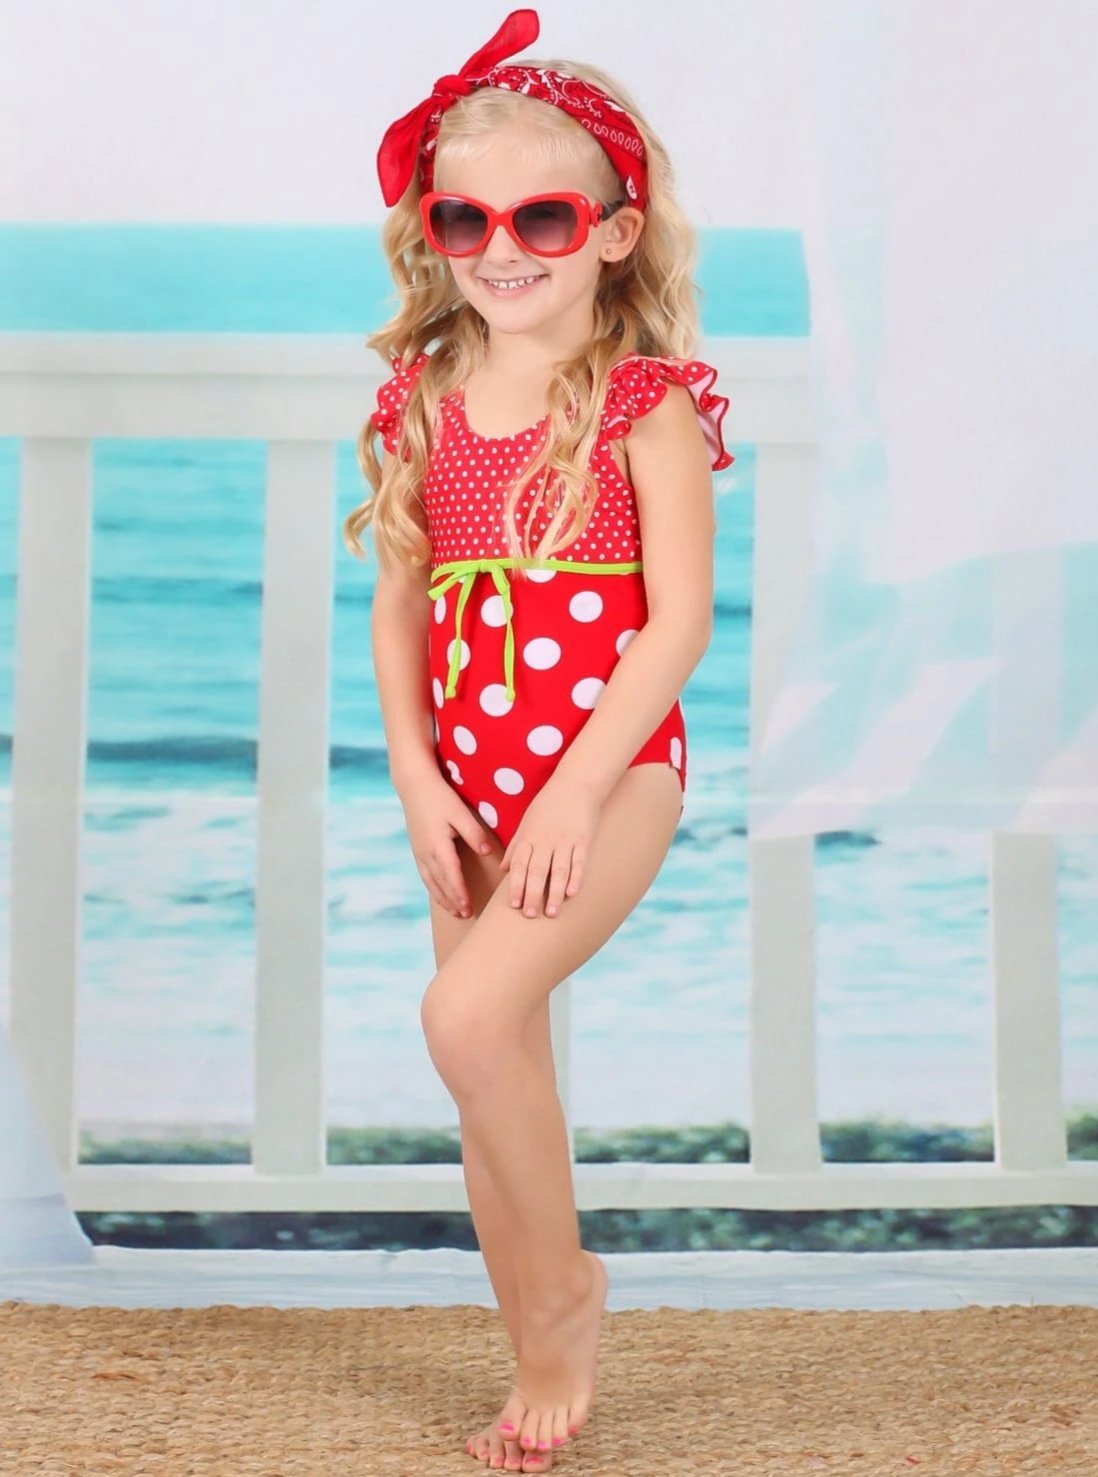 Mia Belle Girls Polka Dot Flutter Sleeve One Piece Swimsuit with Bow Detail